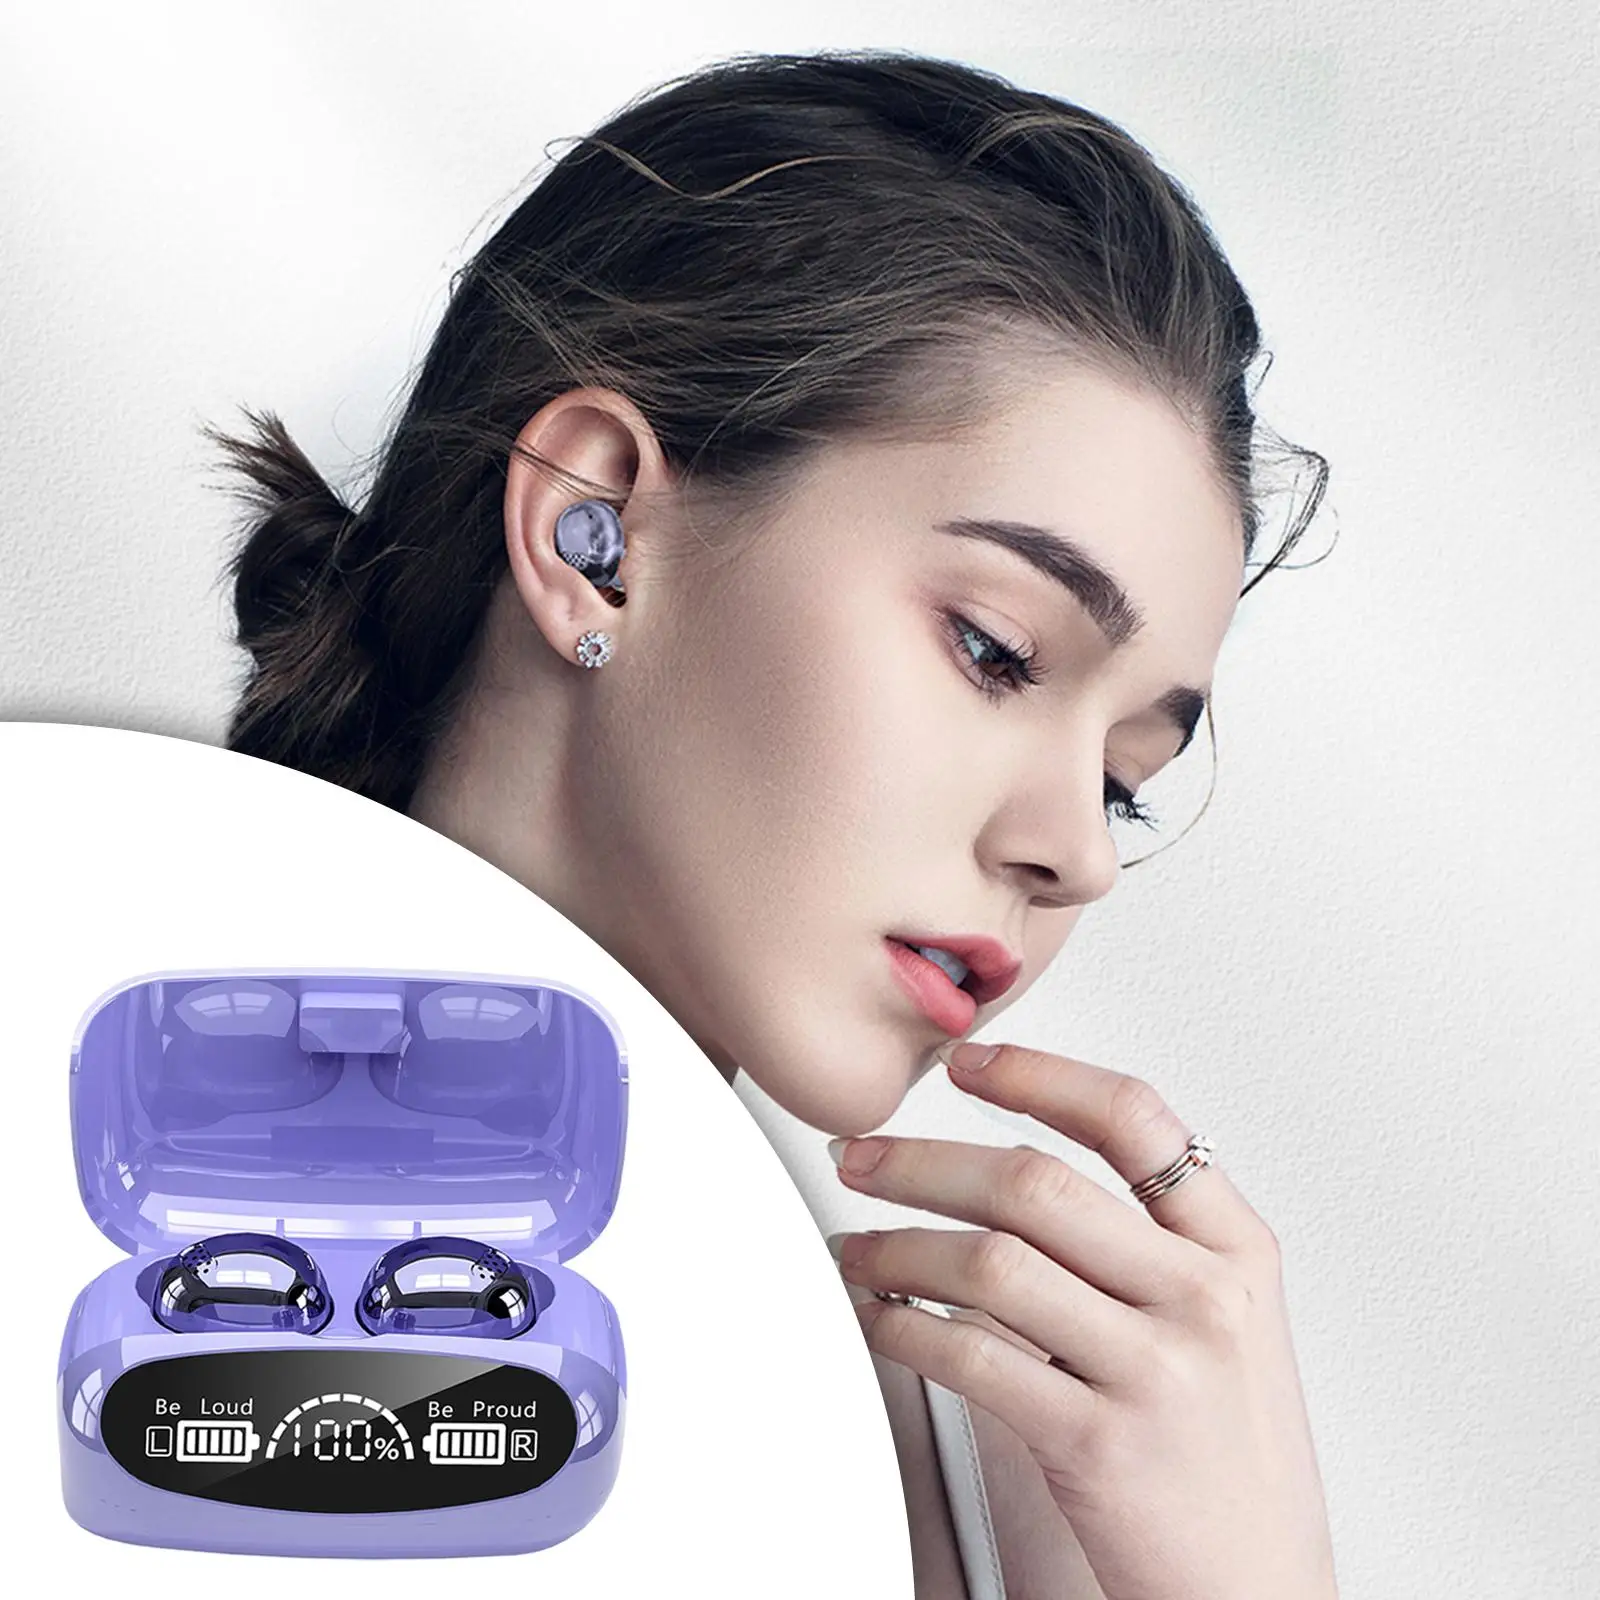  5.0 M32   W/ Charging Case 6H  with  in-Ear Digital LED Display in-Ear Headphones for Gym Sports 